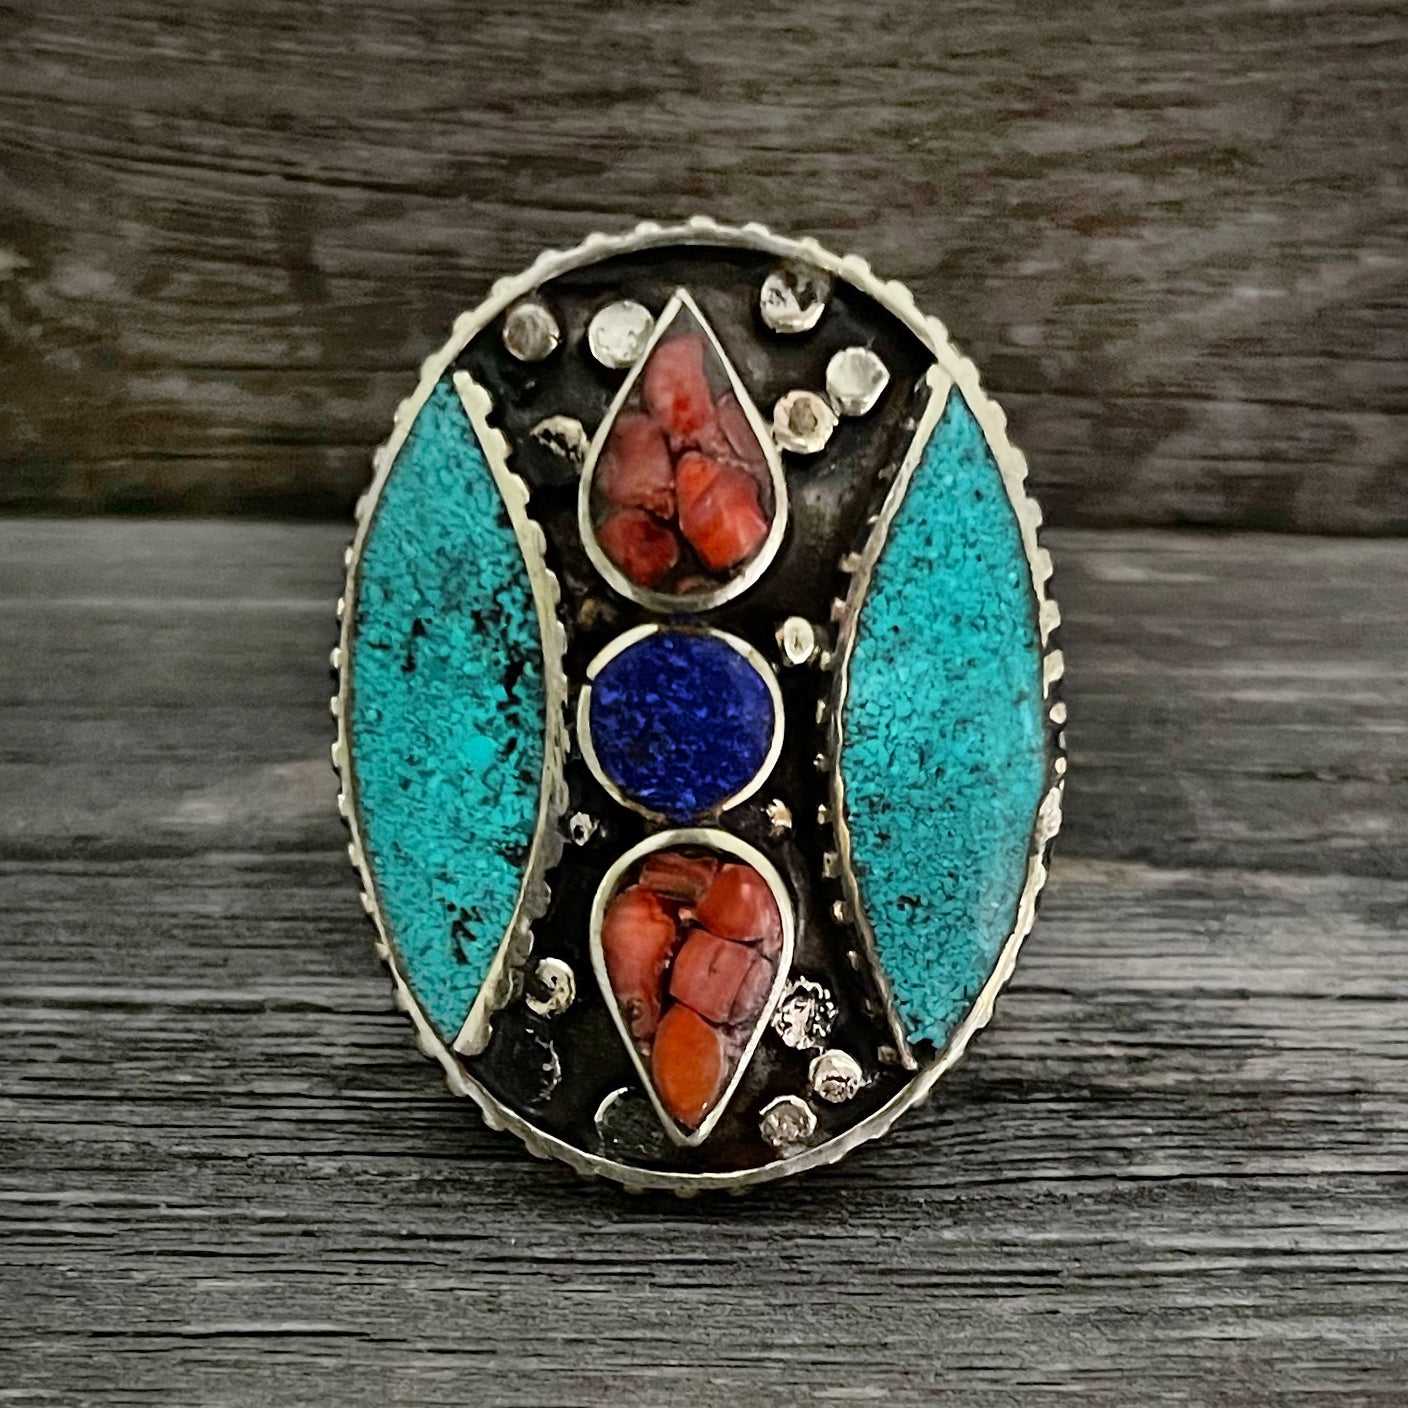 Big statement oval A Tibetan ring with Turquoise, Coral and Lapis Lazuli gemstone